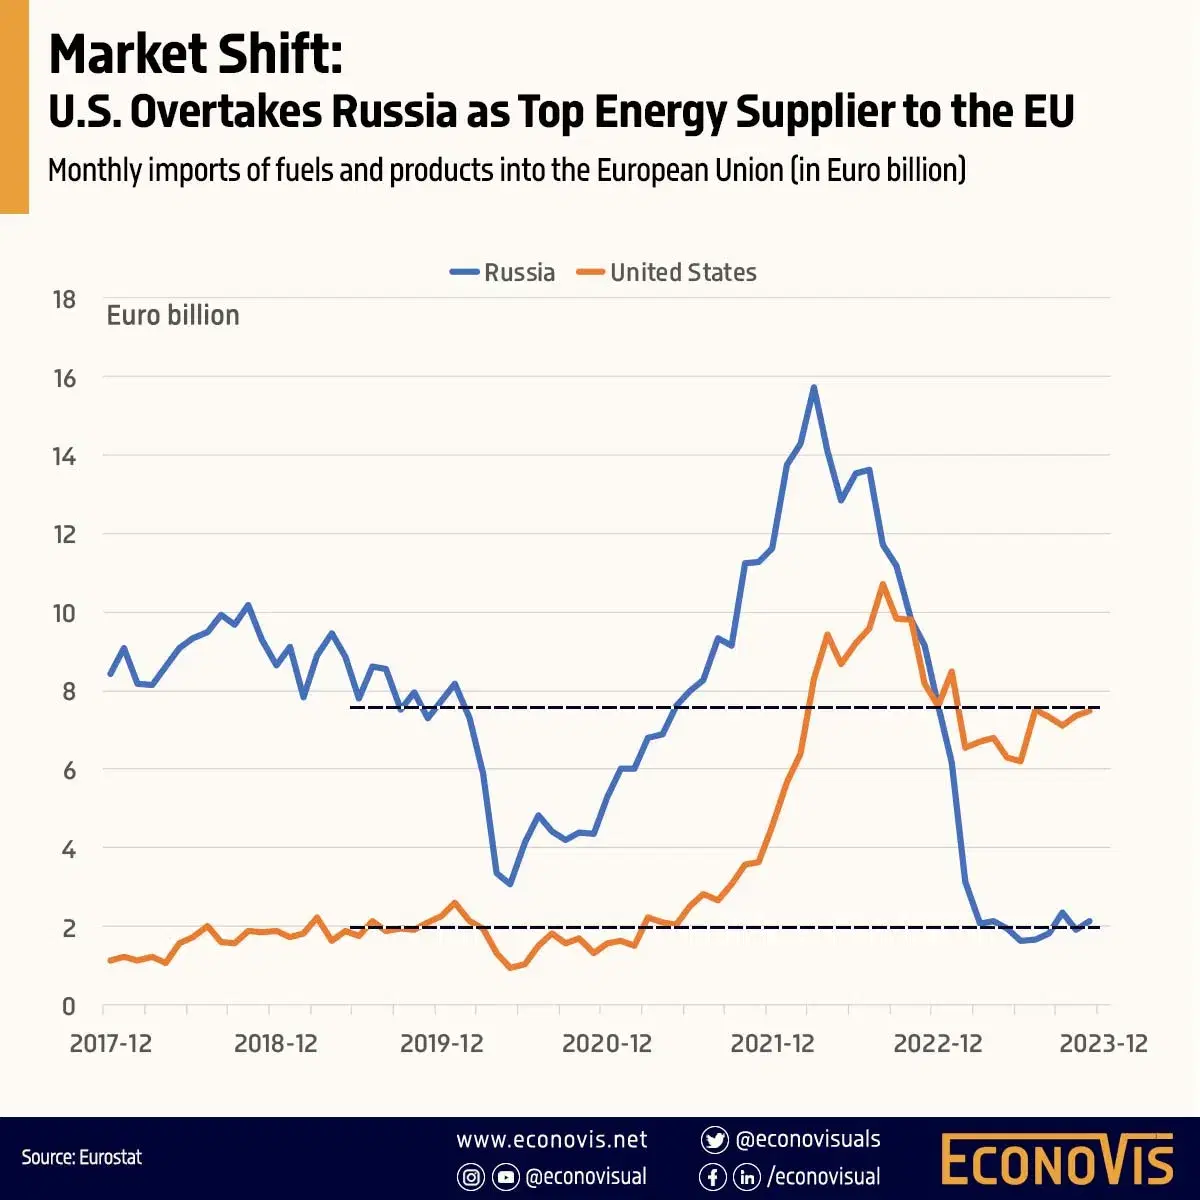 📈 Market Shift: U.S. Overtakes Russia as Top Energy Supplier to the EU